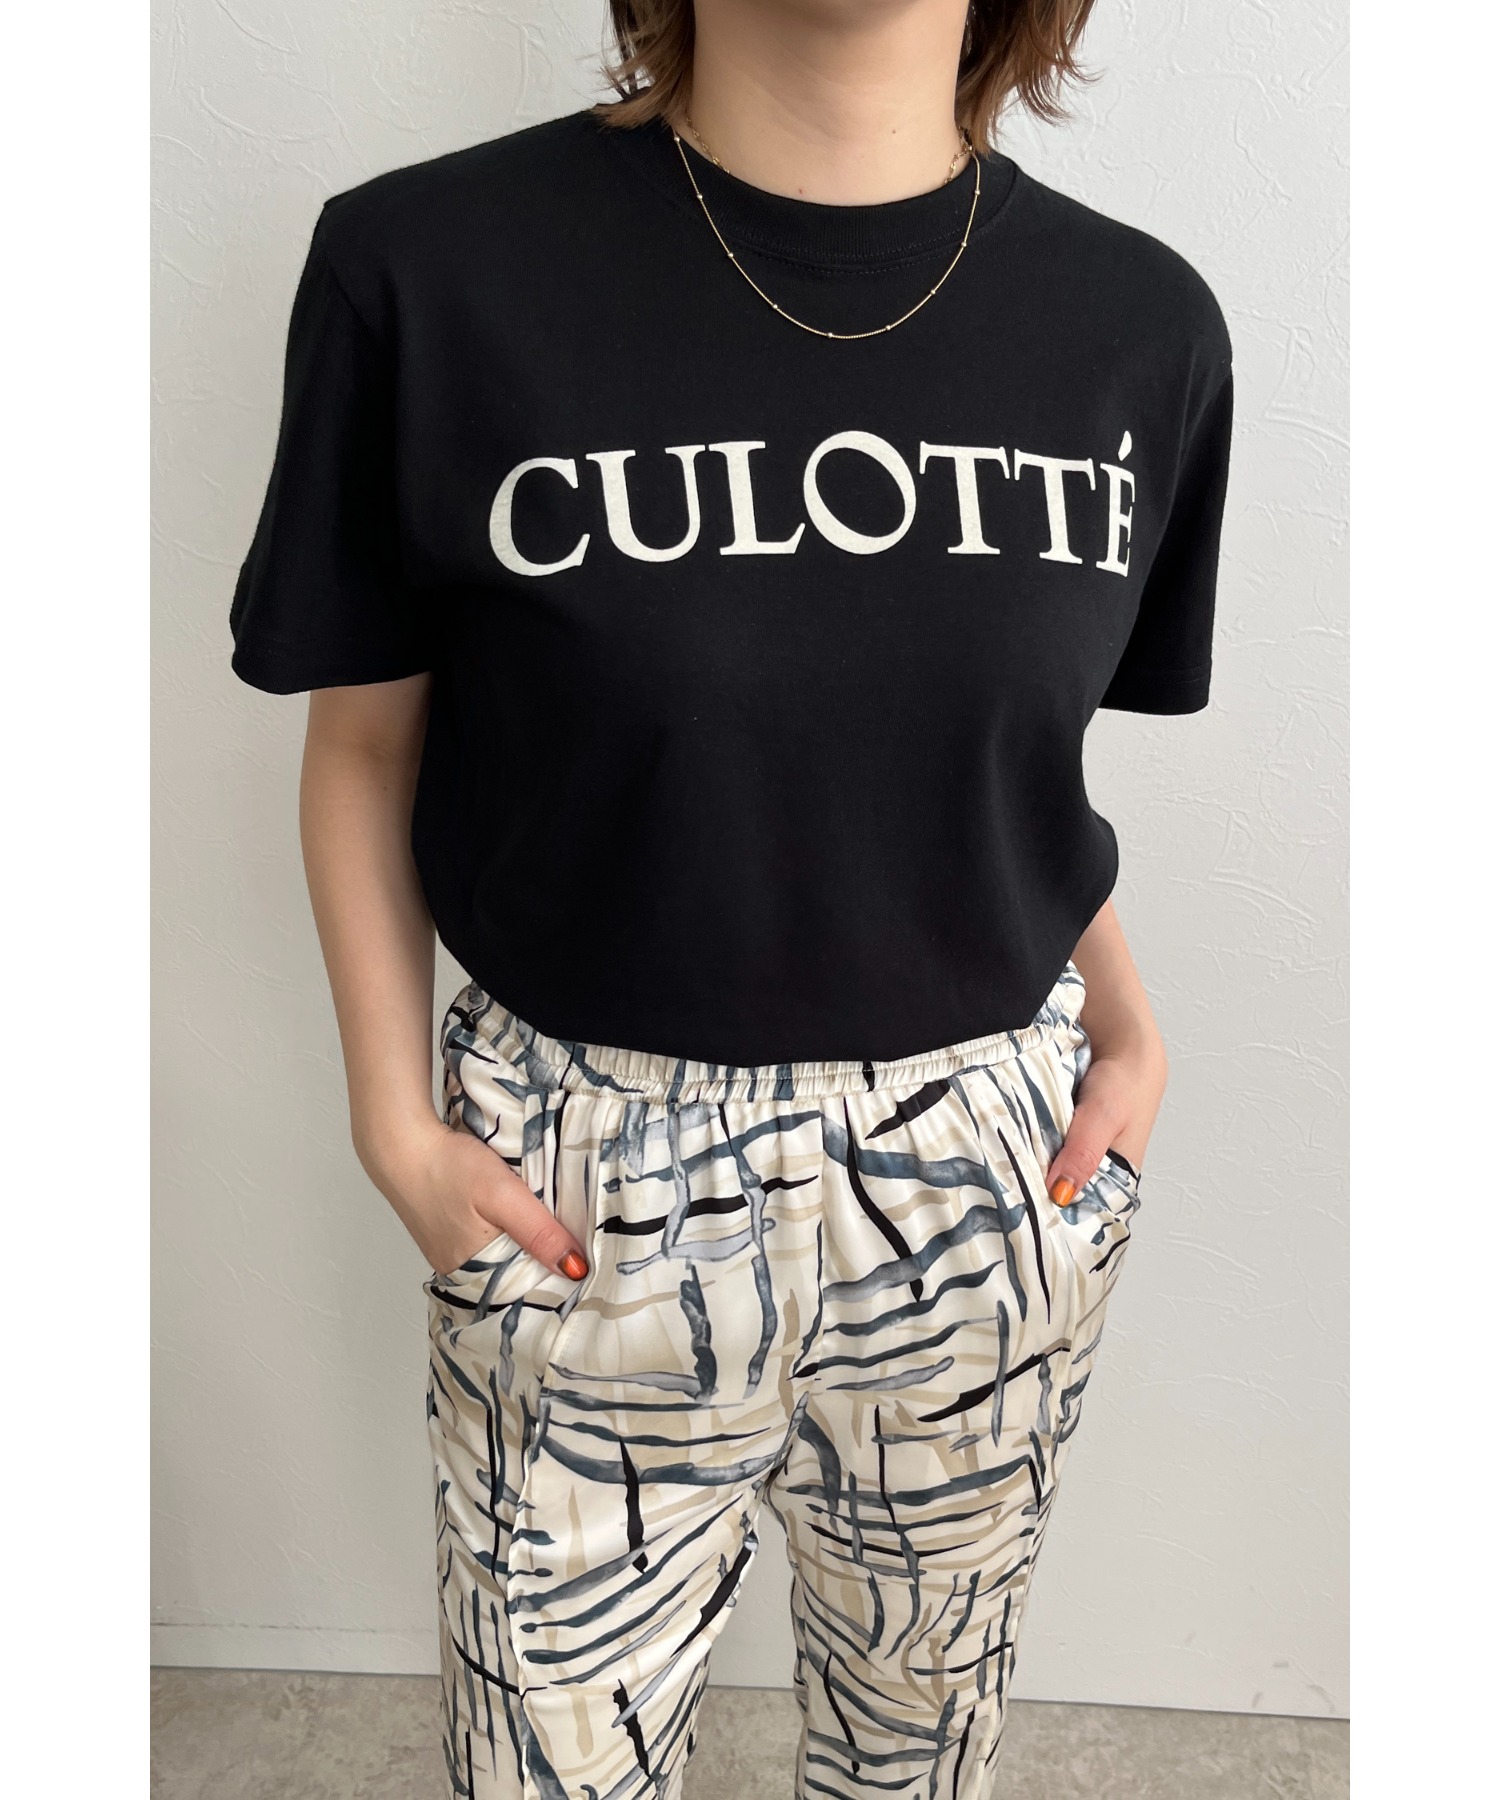 CULOTTE フロッキープリントTシャツ Palm Riche│Eimee Law & LHELBIE